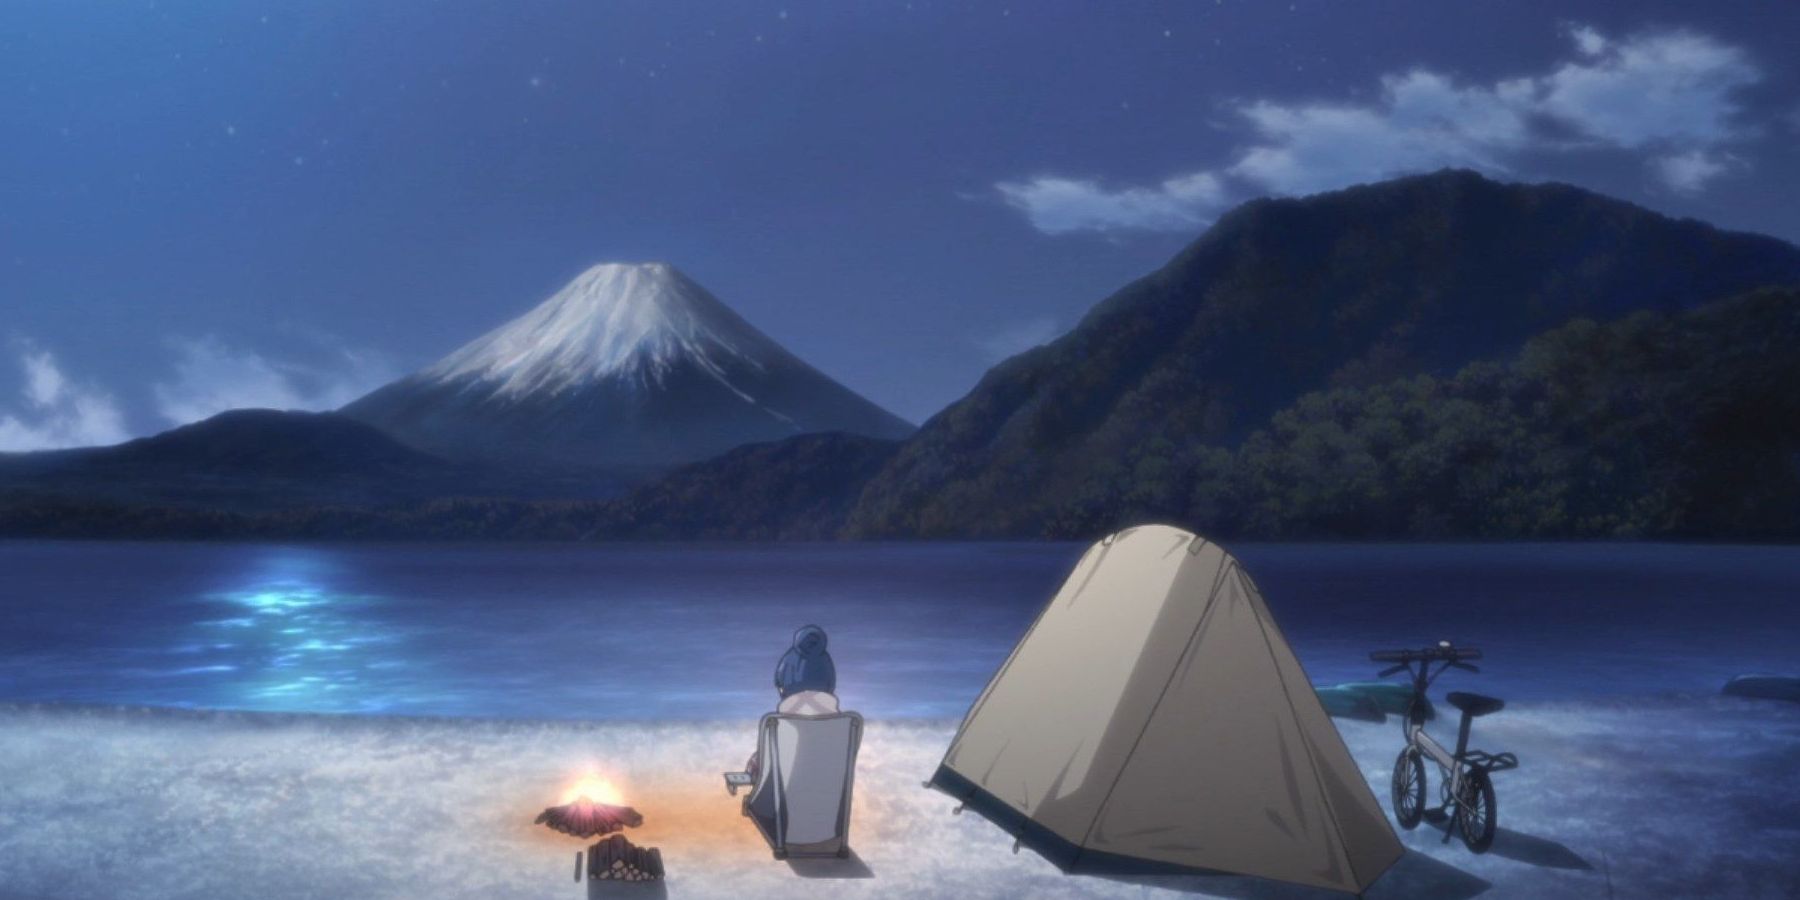 Rin waiting for the sunrise in Laid-Back Camp Season 2